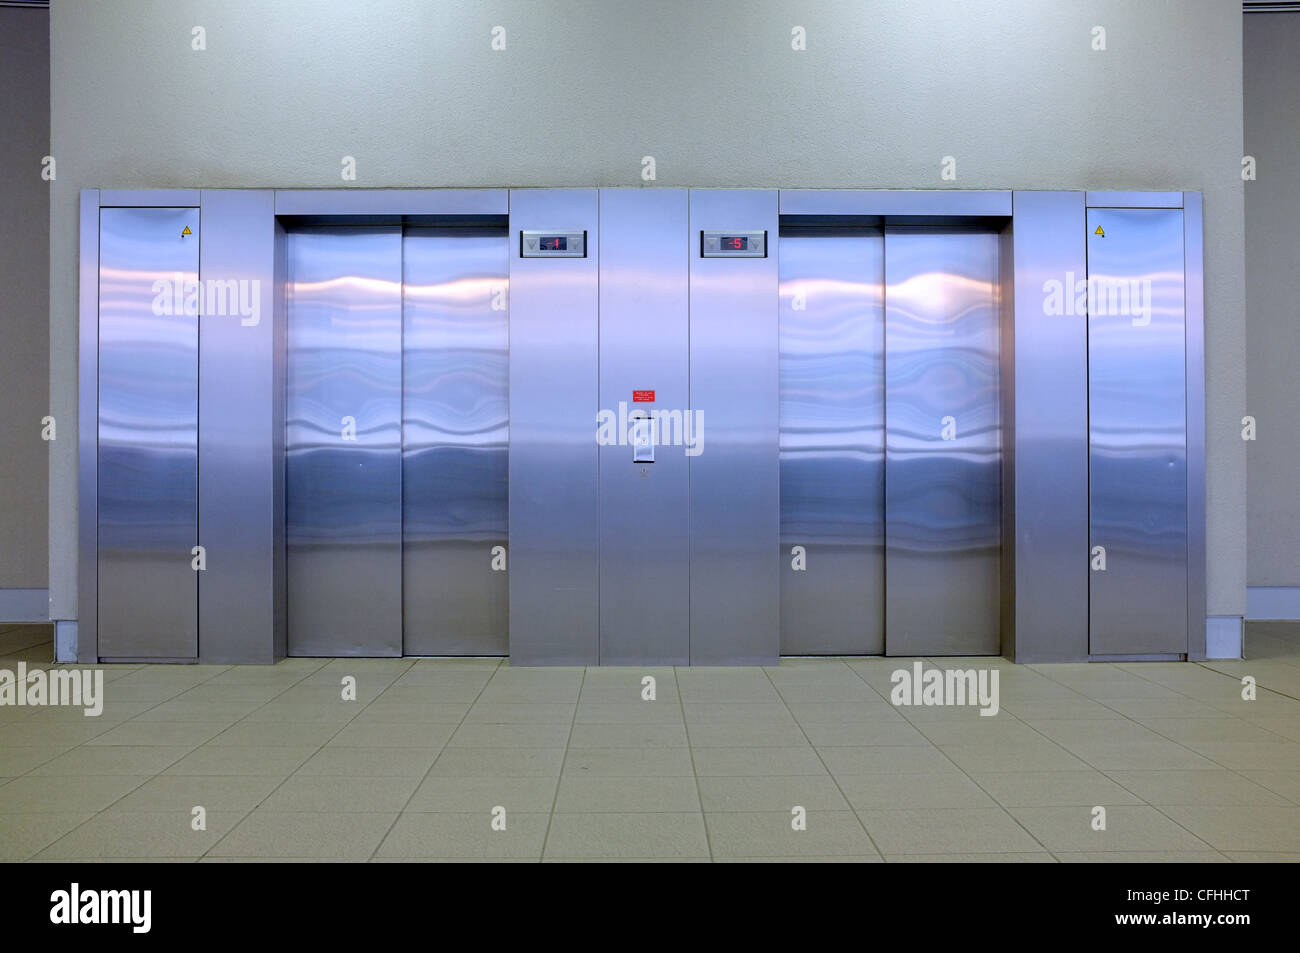 Lifts/elevators at the main train station in Brussels, Belgium. Stock Photo